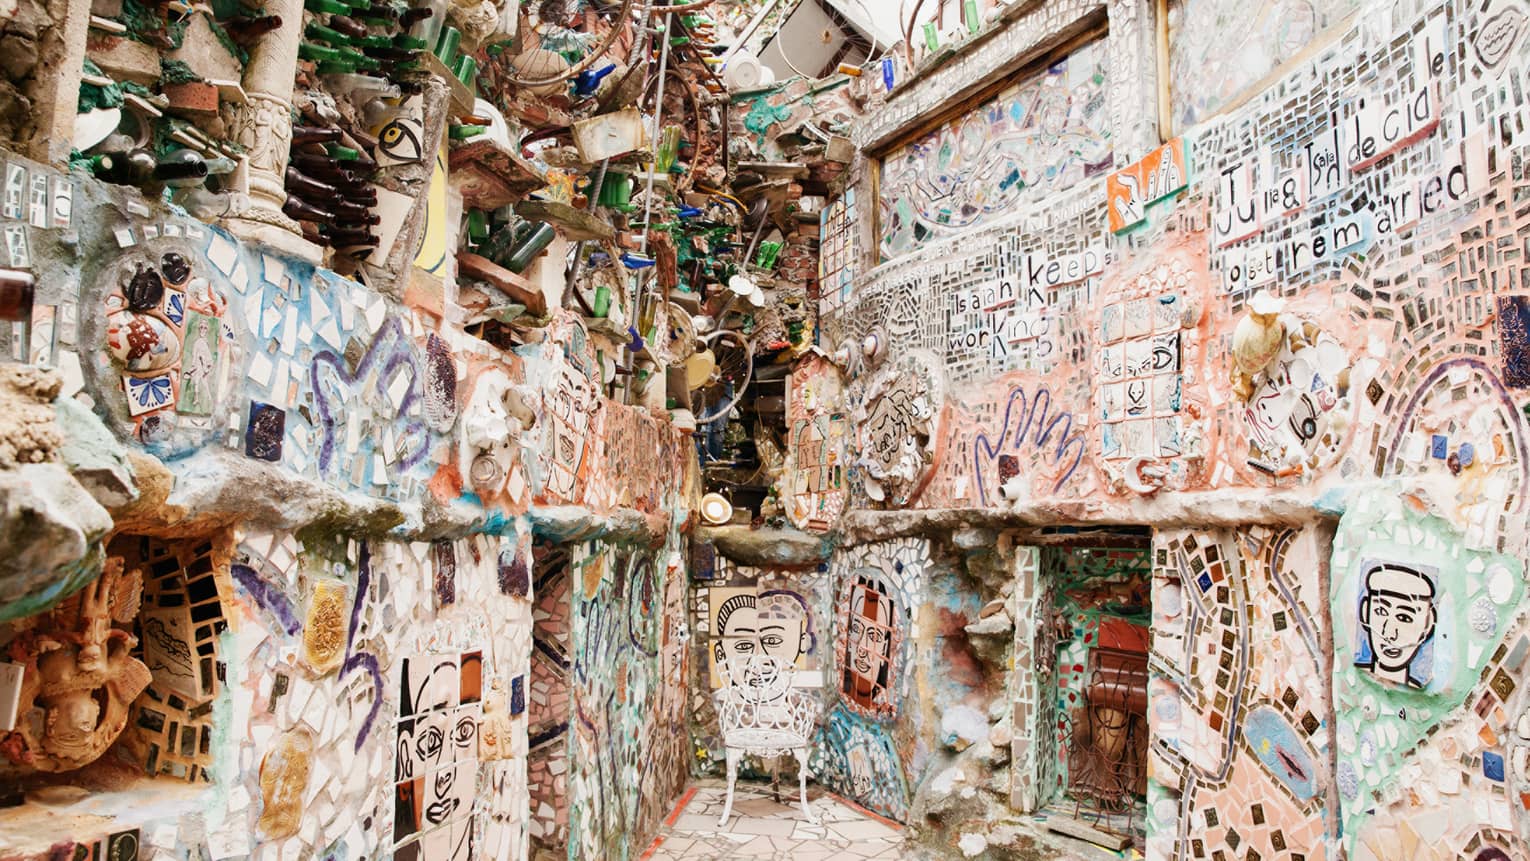 Walls covered in drawings and paintings.